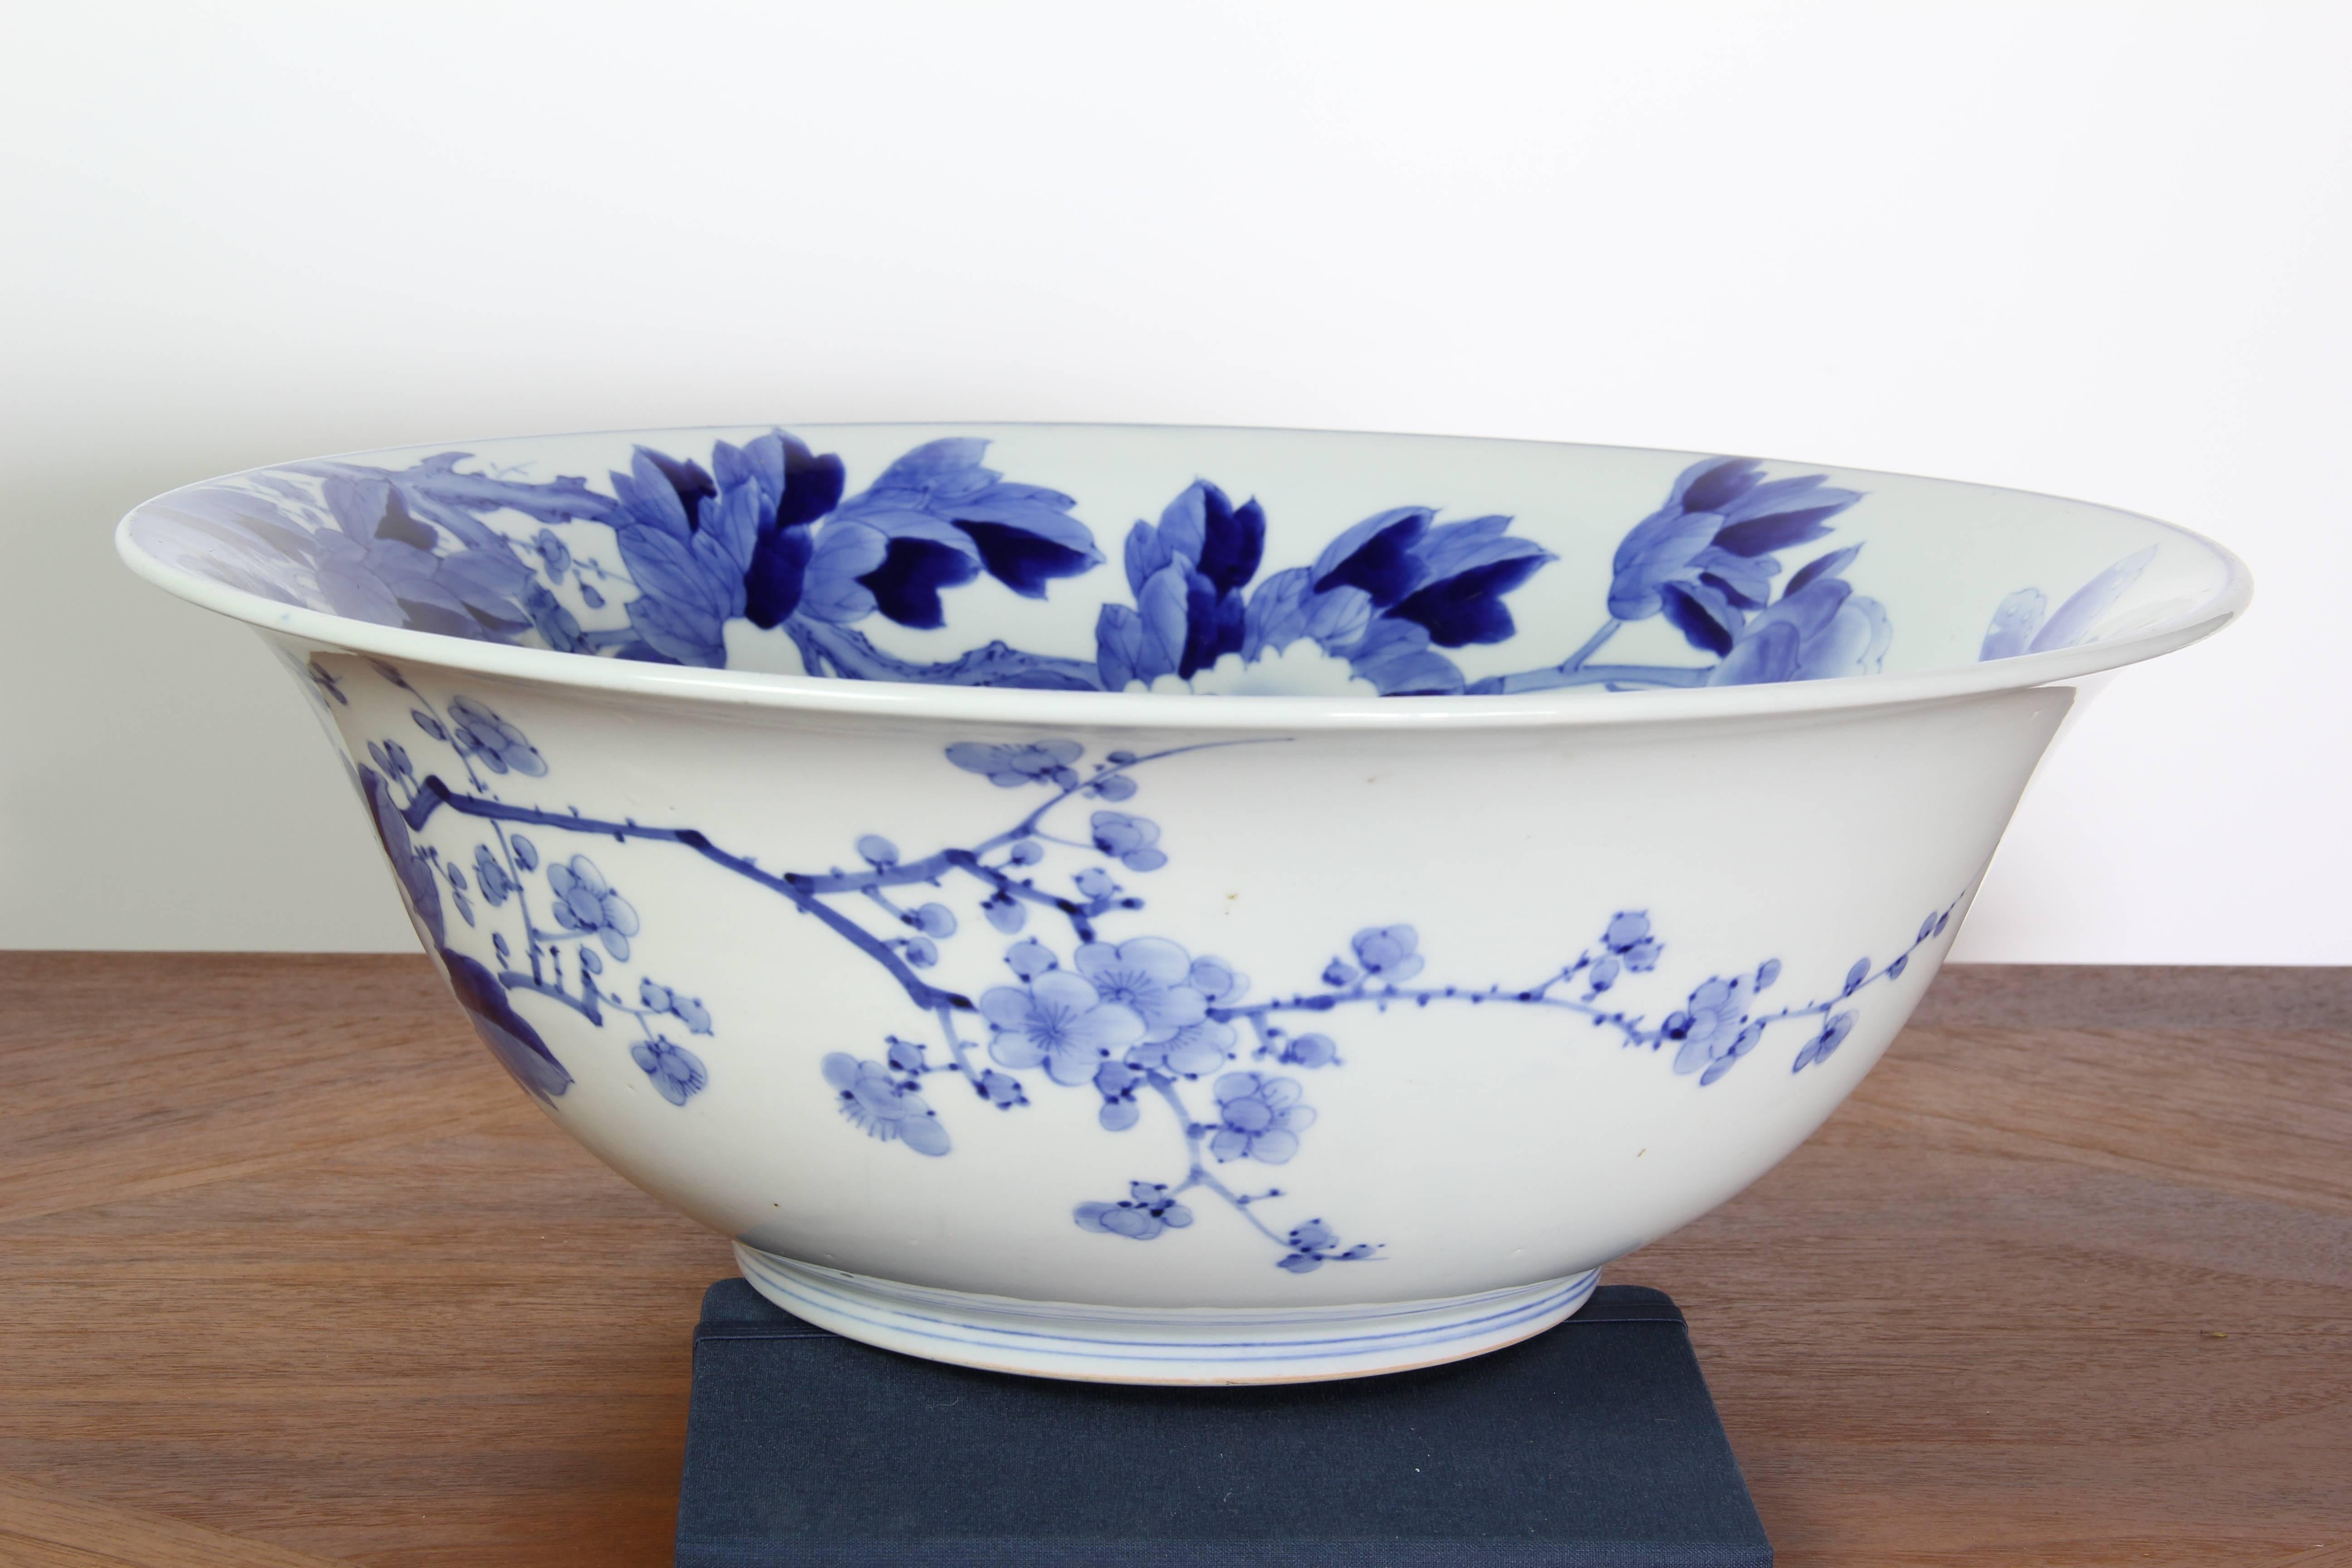 One-of-a-kind, hand-painted flowers and butterfly glazed in stunning blue and white design.